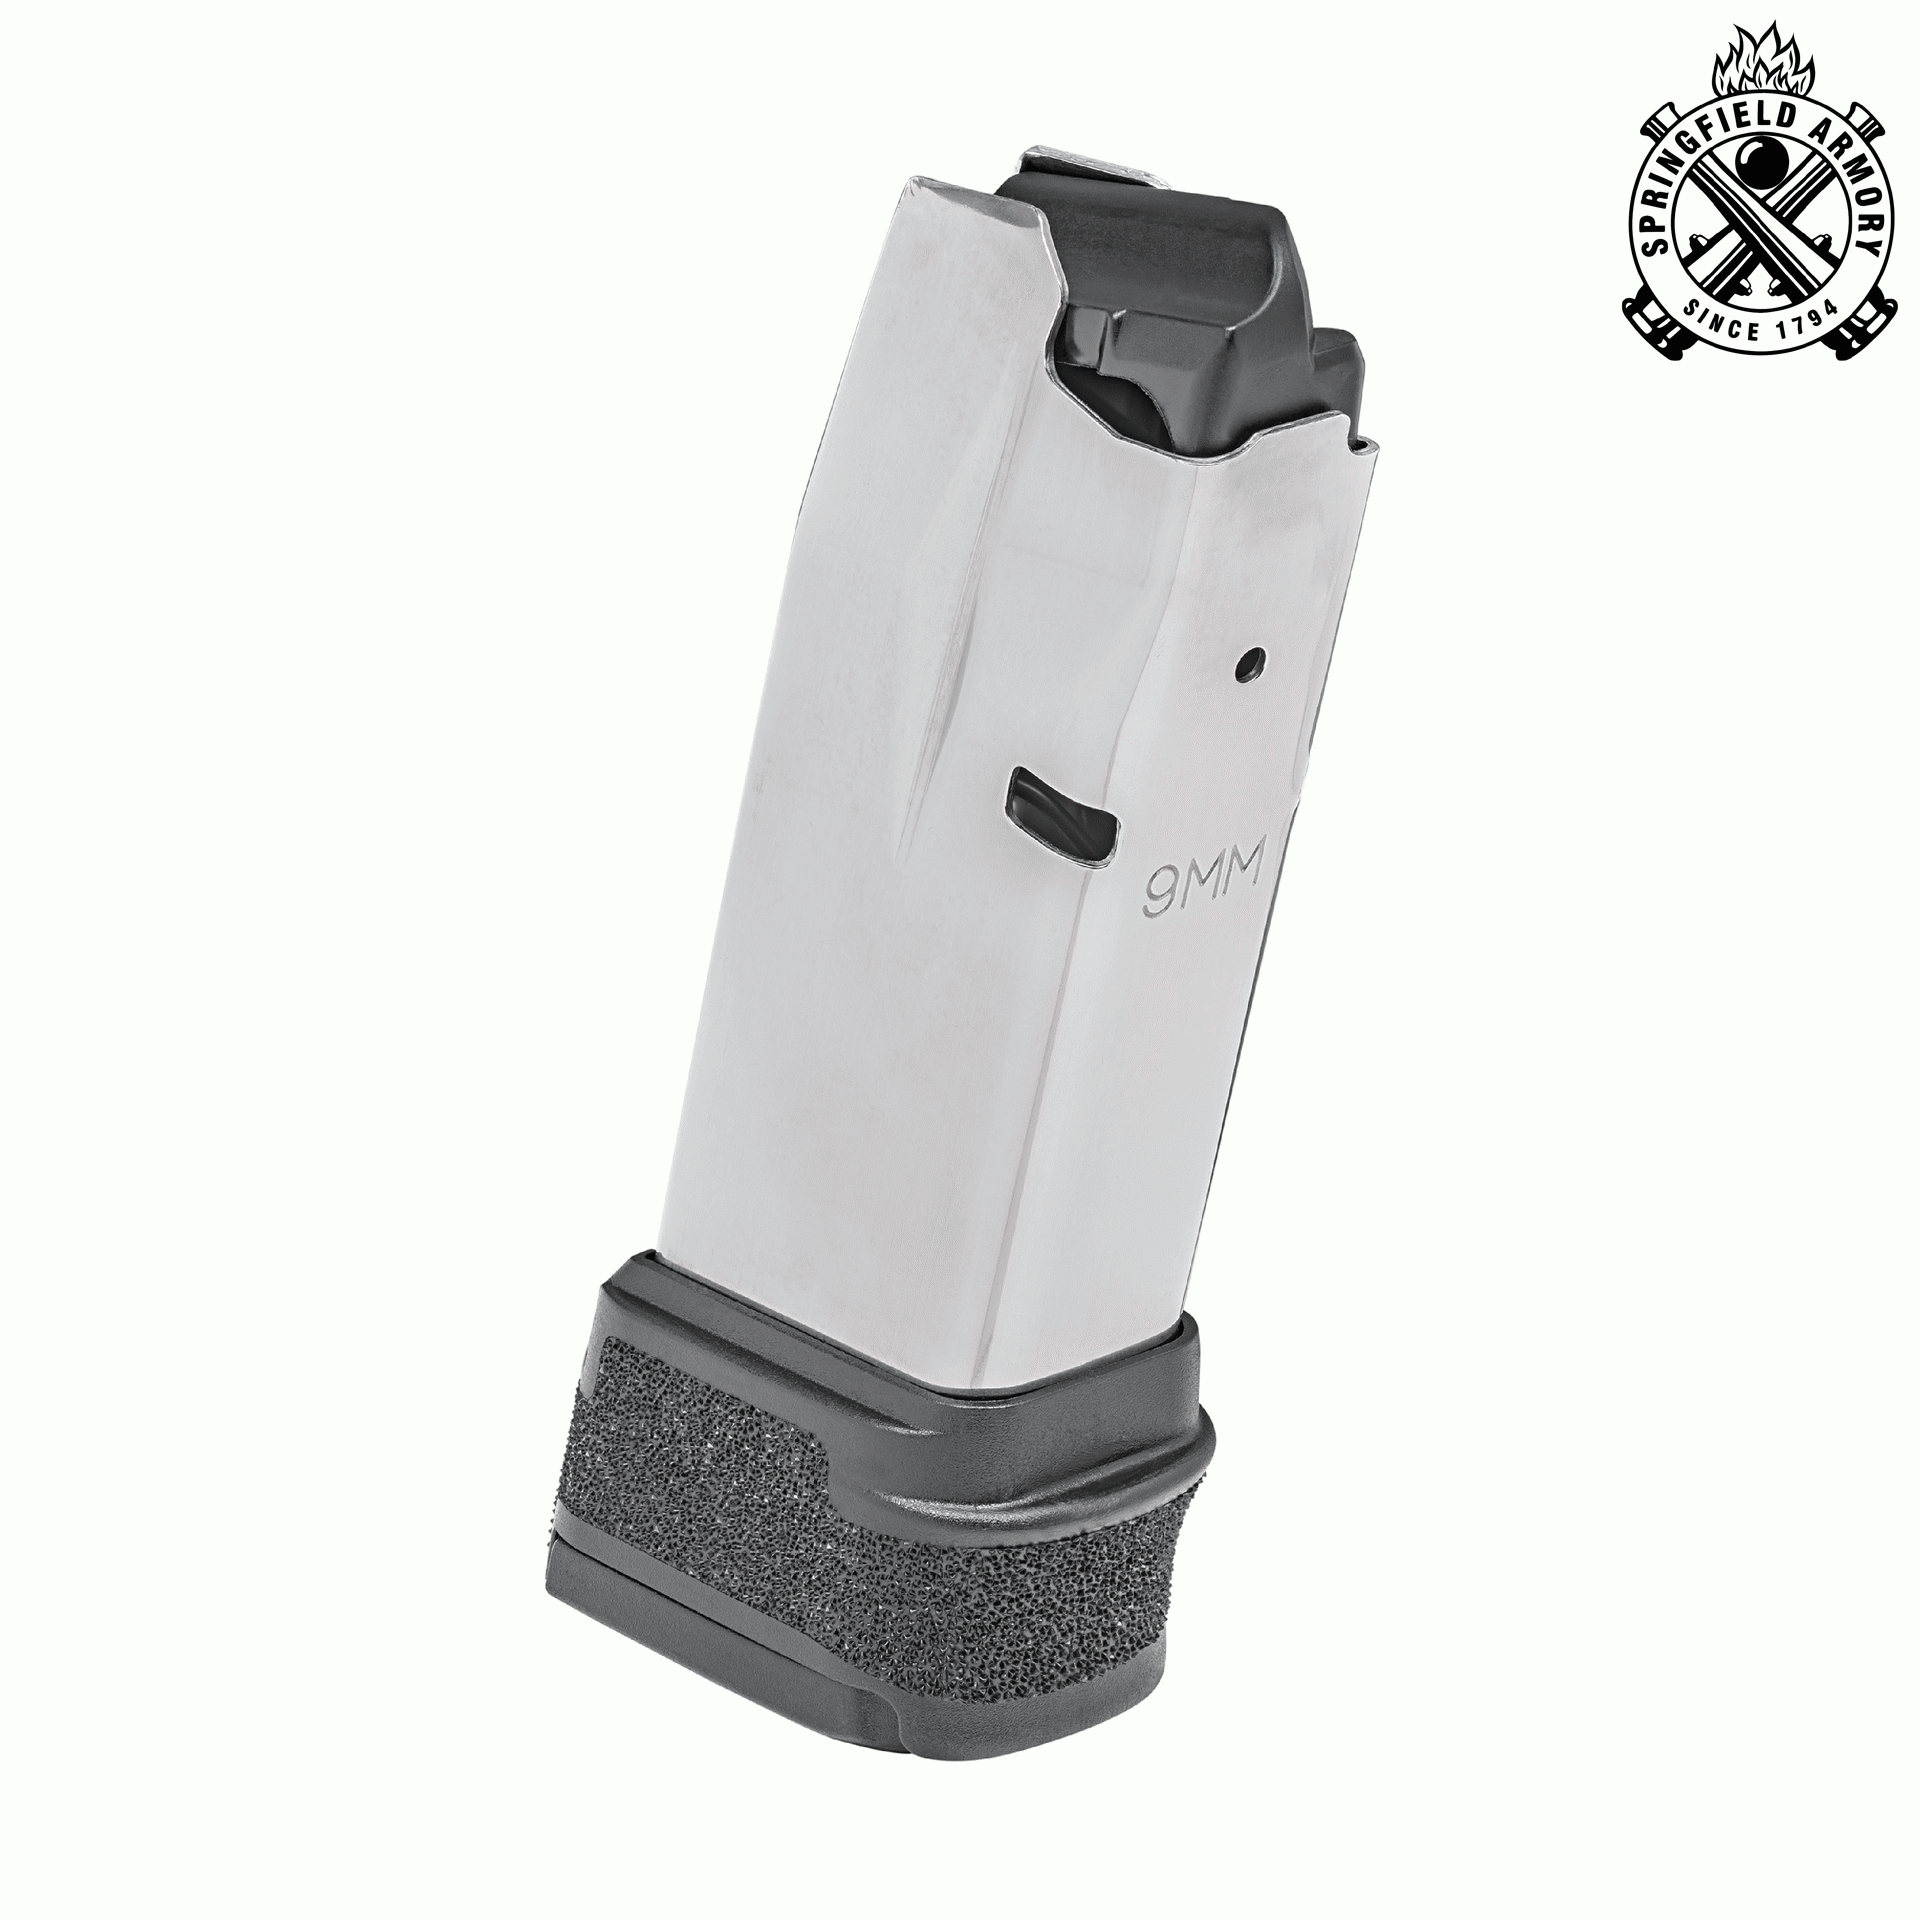 springfield-armory-hellcat-9mm-15-round-extended-magazine-the-mag-shack